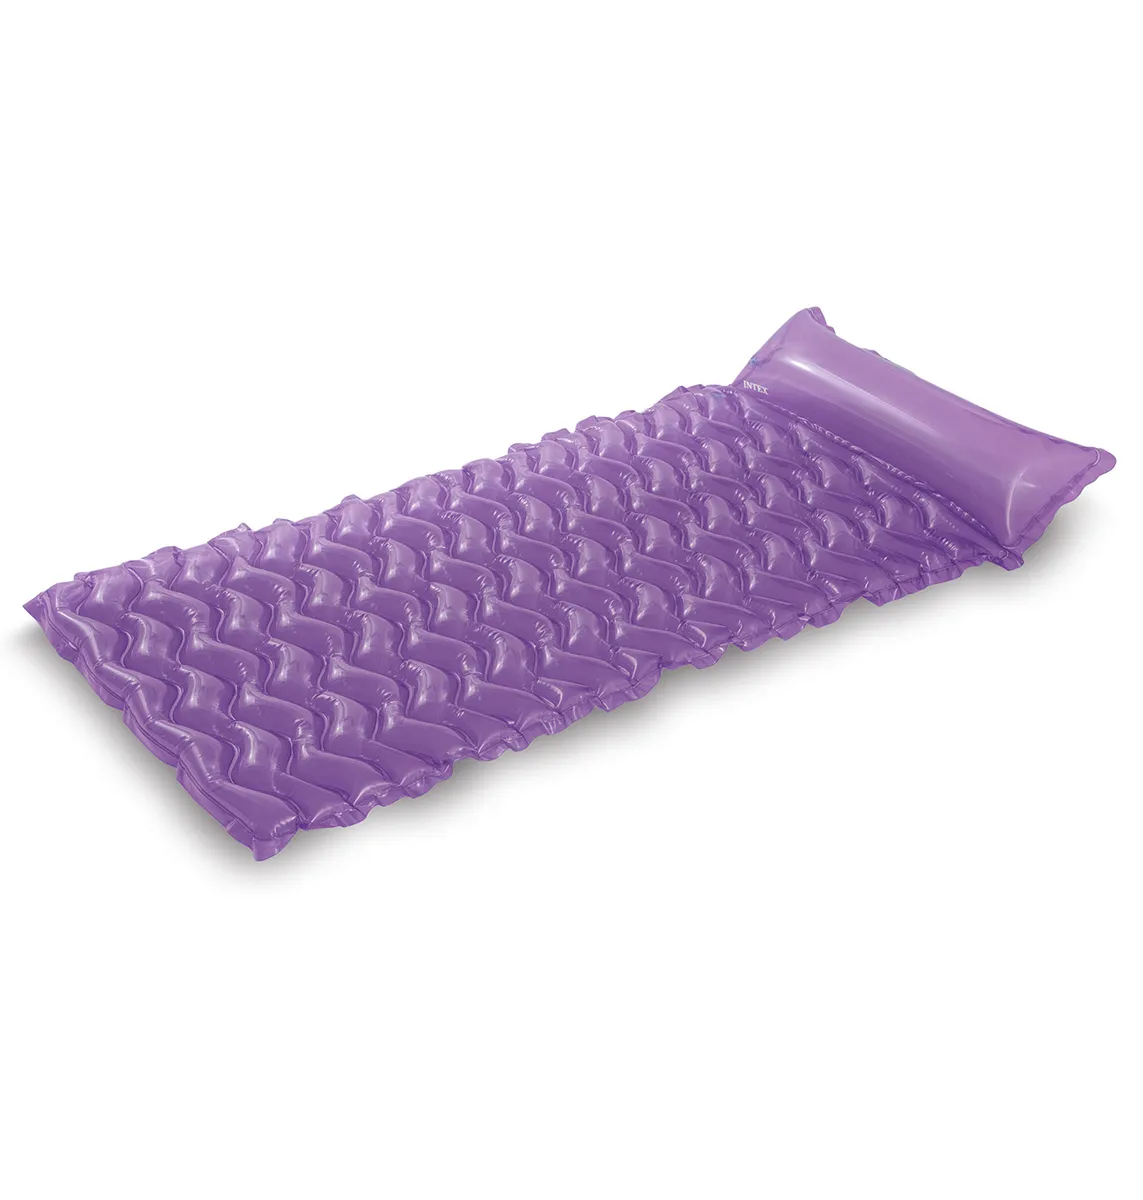 MATELAS GONFLABLE A ROULER NEON FROST